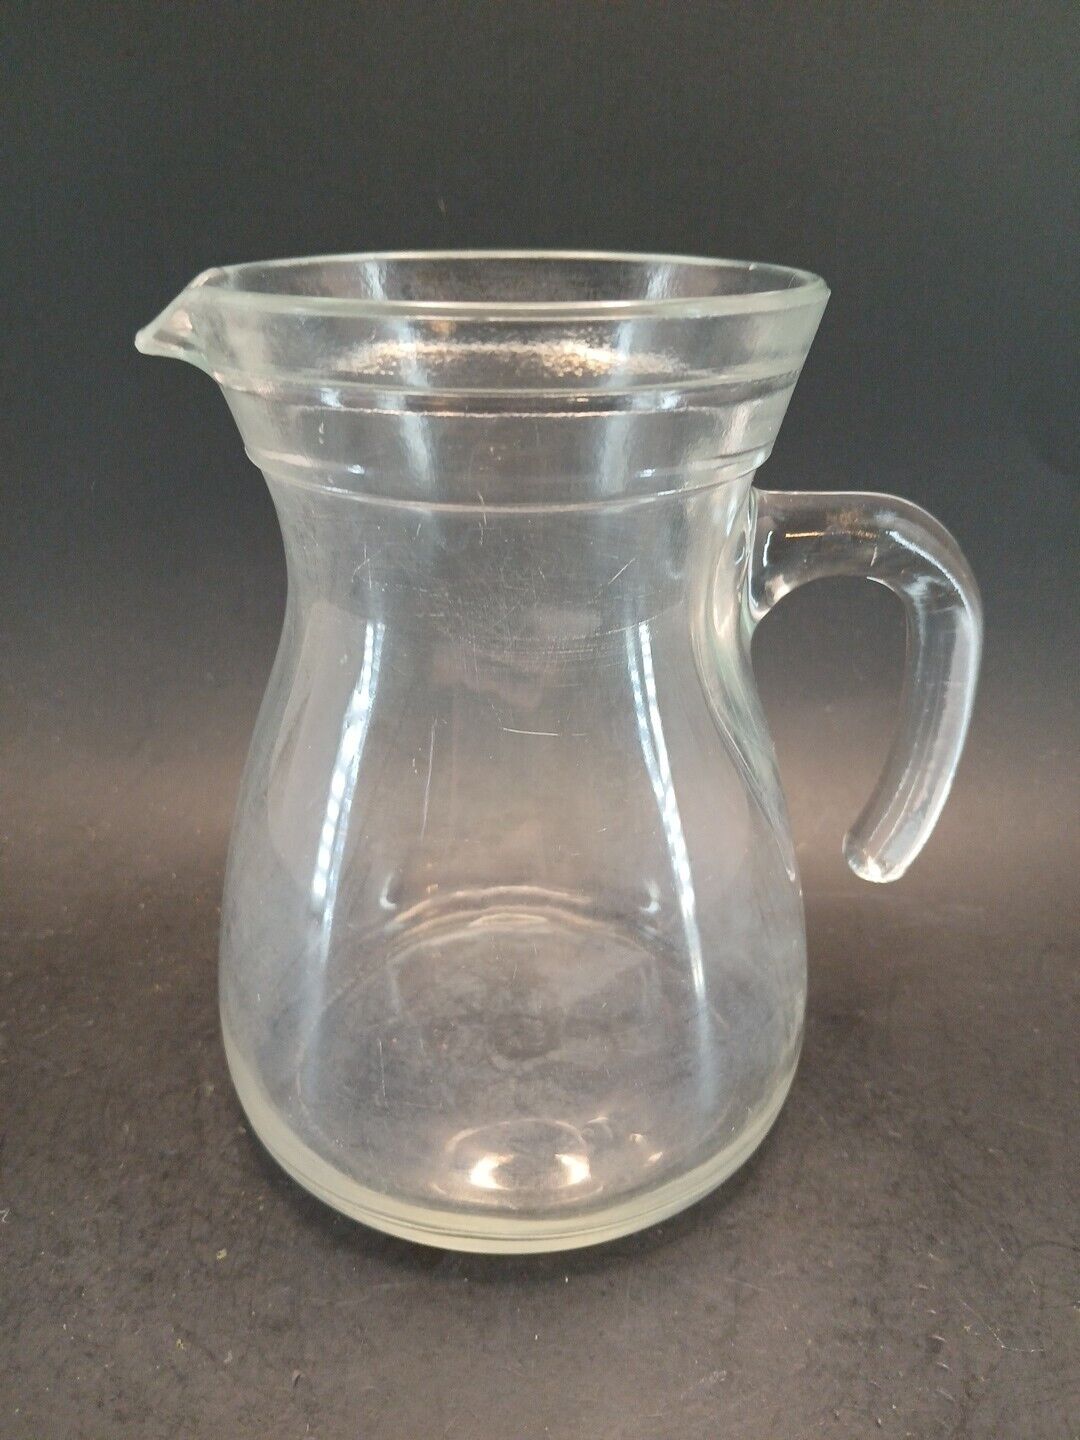  Cerve S P A Parma Italy Small Glass Pitcher L